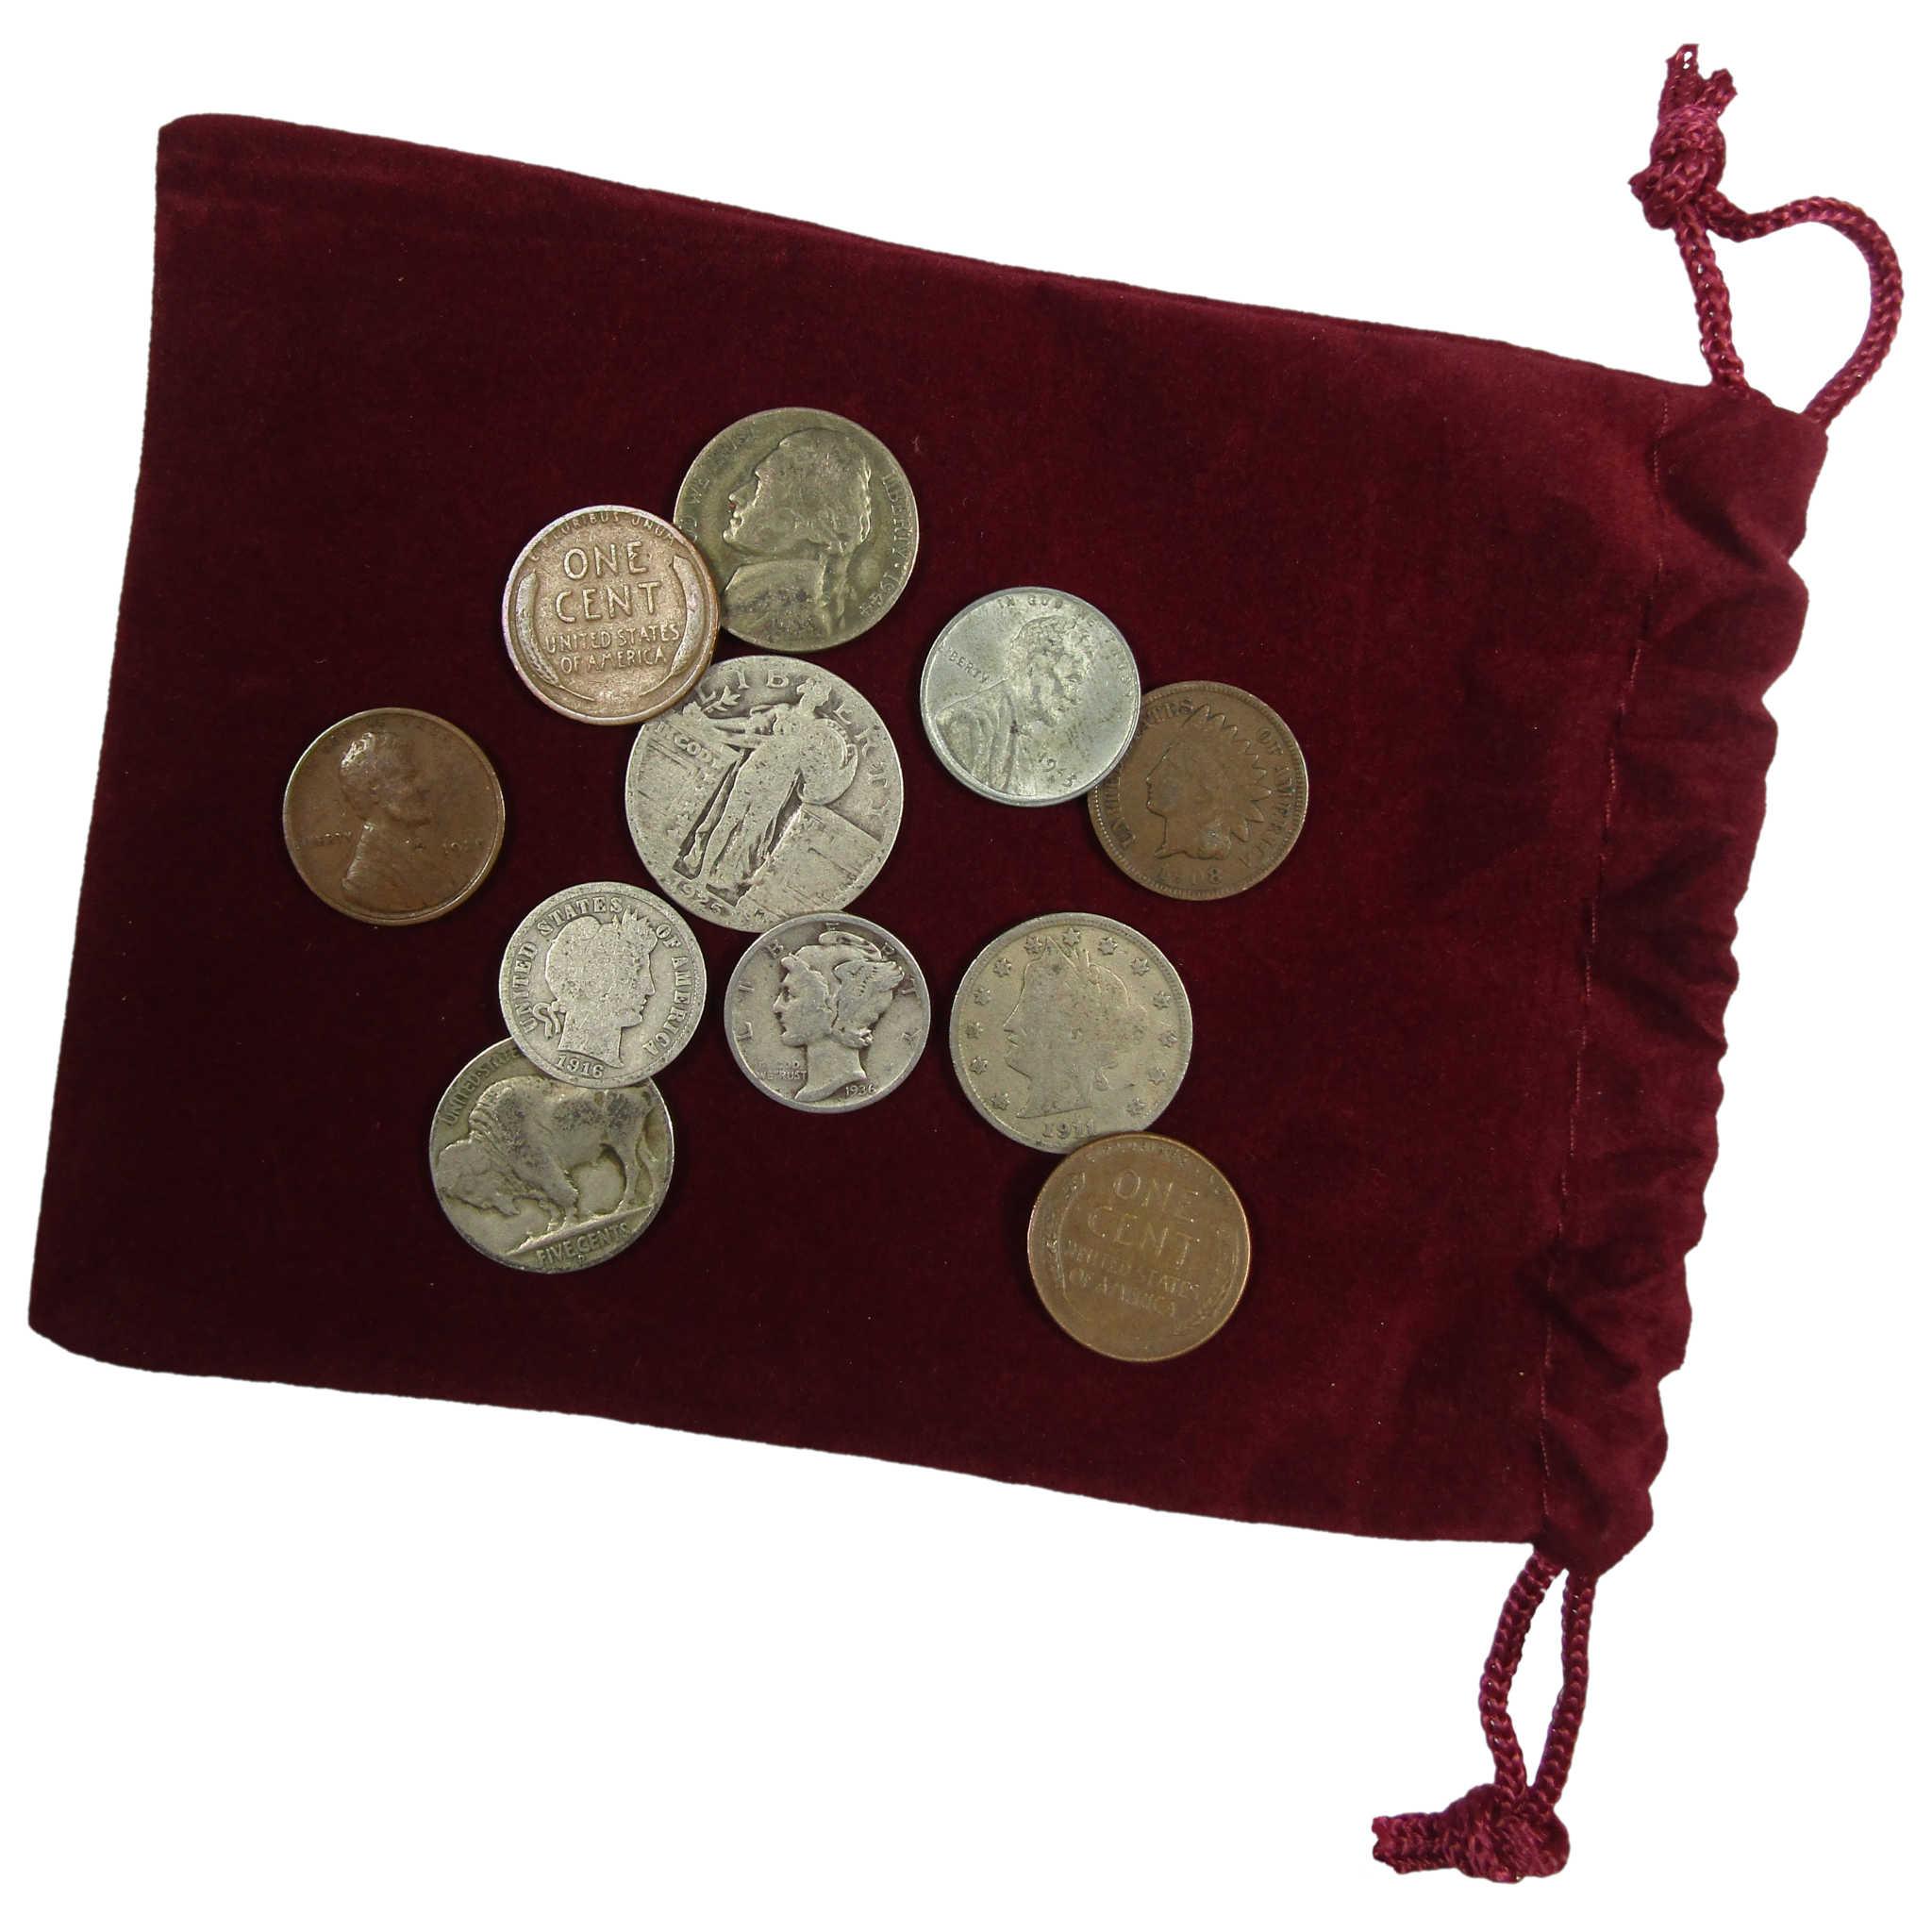 11 Classic Coin Grab Bag of Historic U.S. Coins with Burgundy Velour Pouch